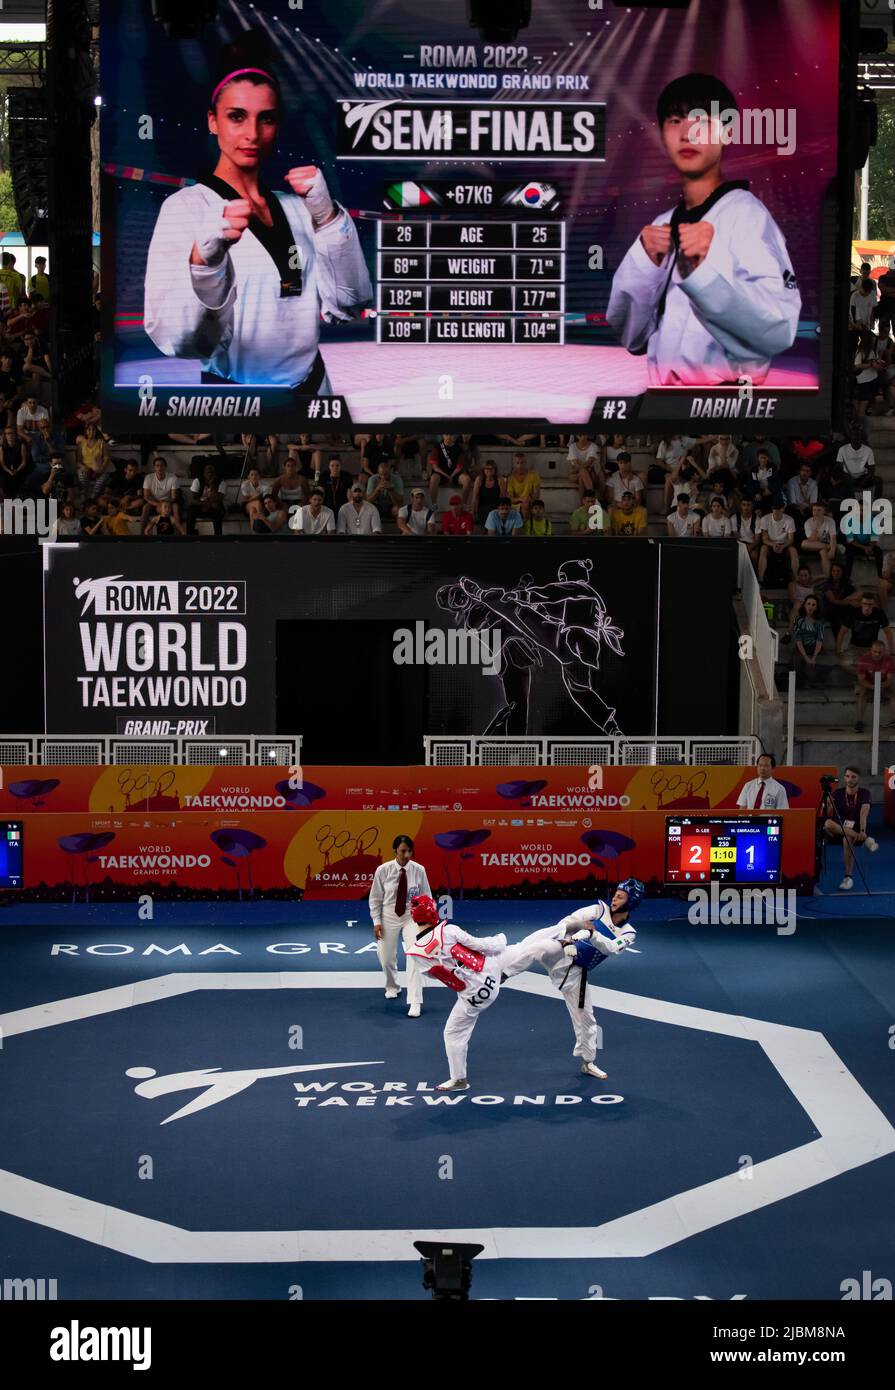 Taekwondo ground and banner with fighter in action . World Taekwondo championship, Rome, Italy, june 4 2022 Stock Photo